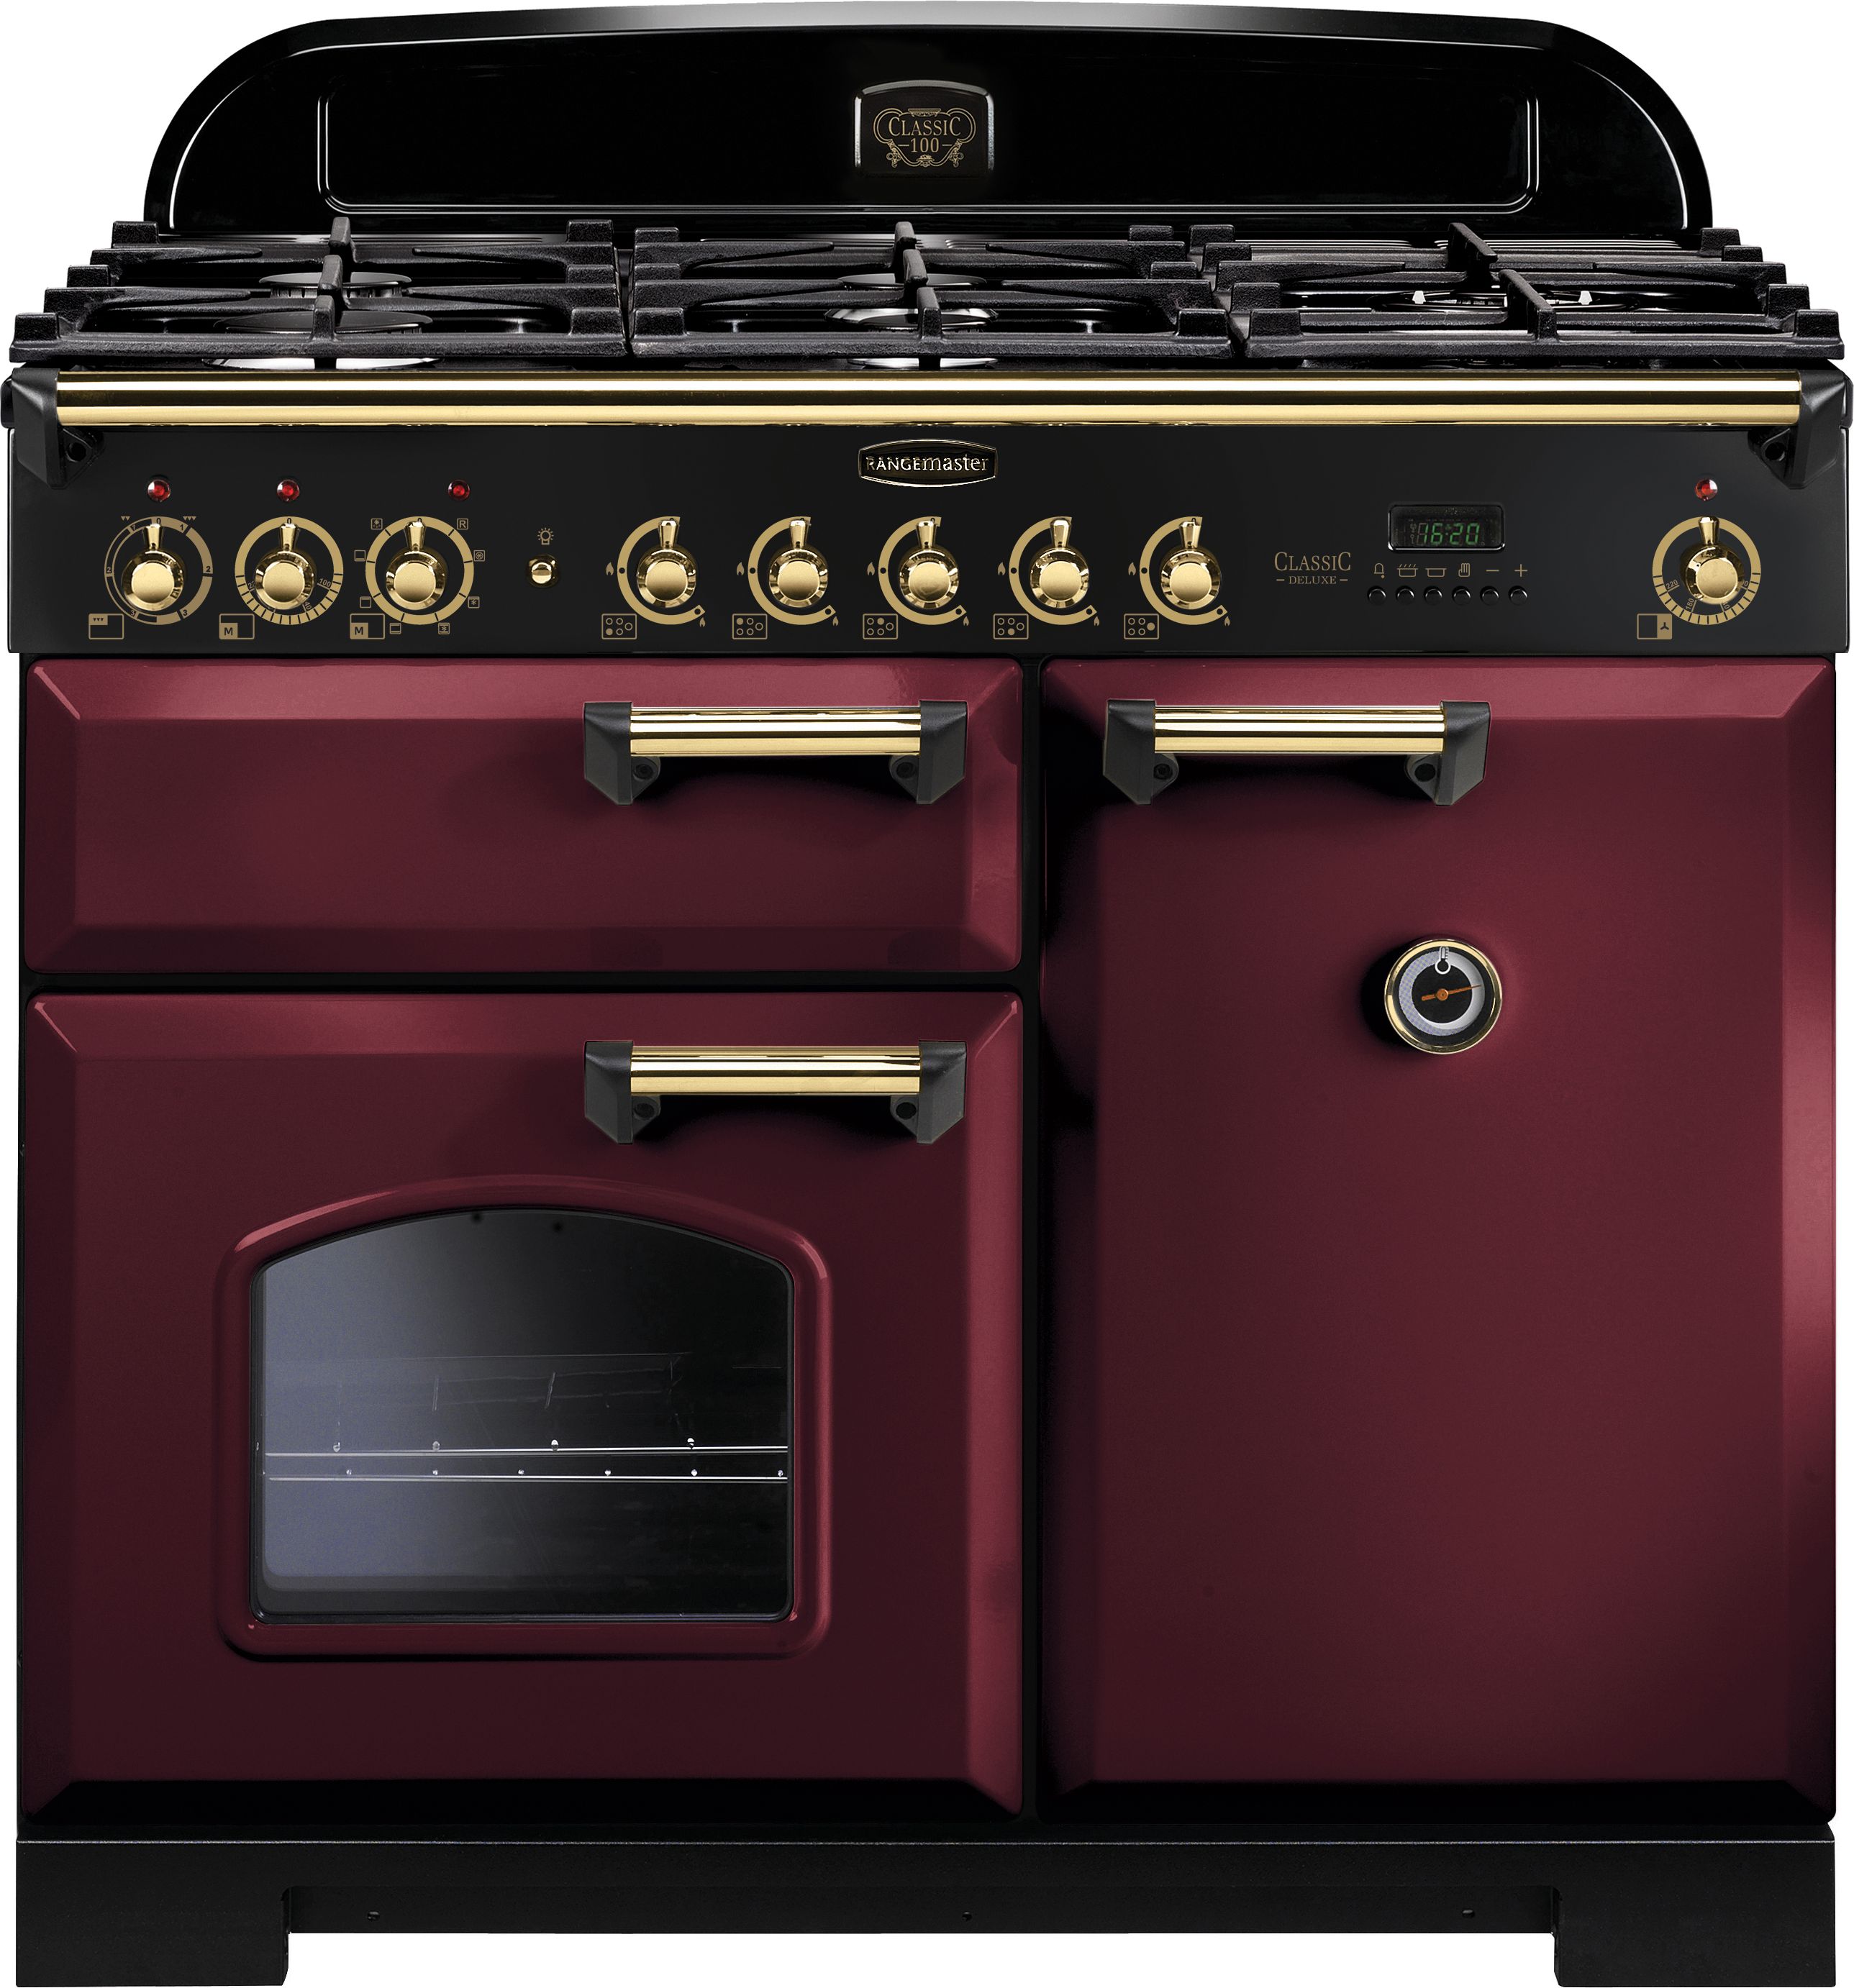 Rangemaster Classic Deluxe CDL100DFFCY/B 100cm Dual Fuel Range Cooker - Cranberry / Brass - A/A Rated, Red